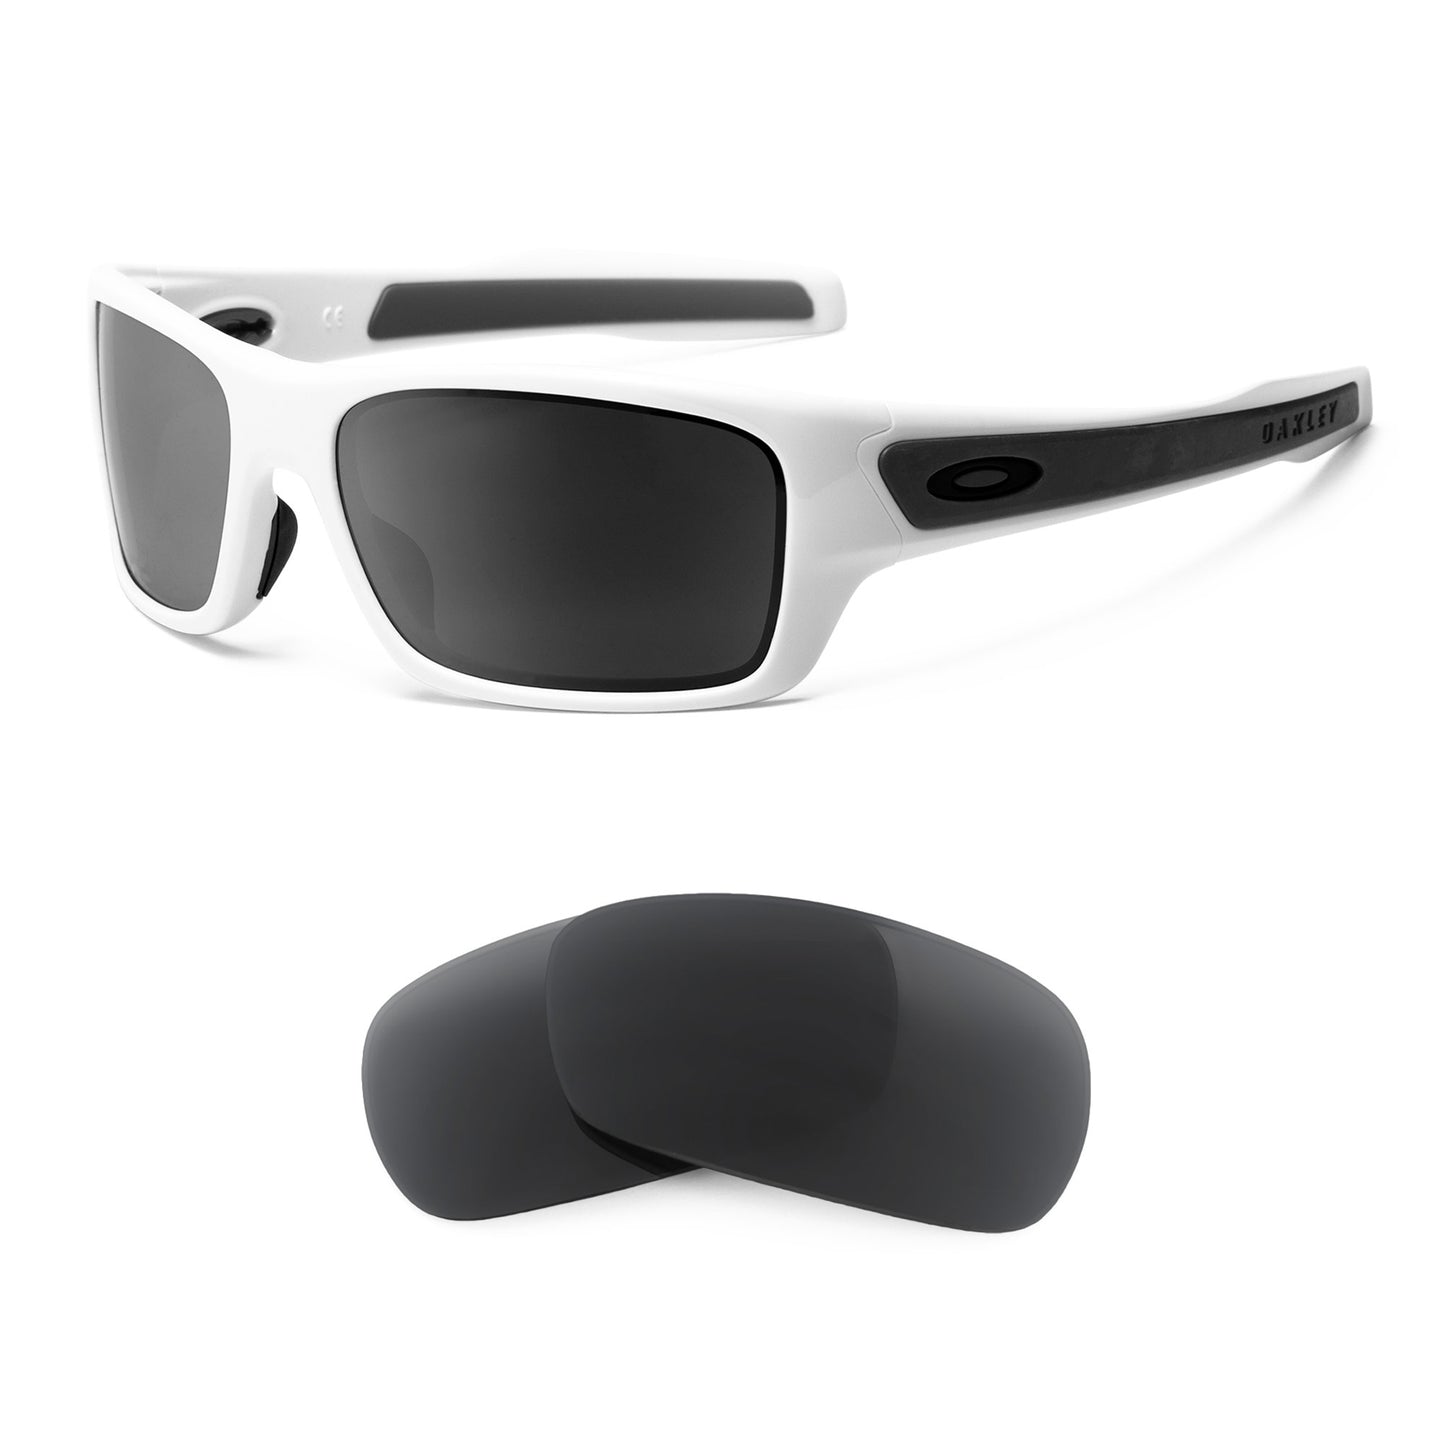 Oakley Turbine XS sunglasses with replacement lenses